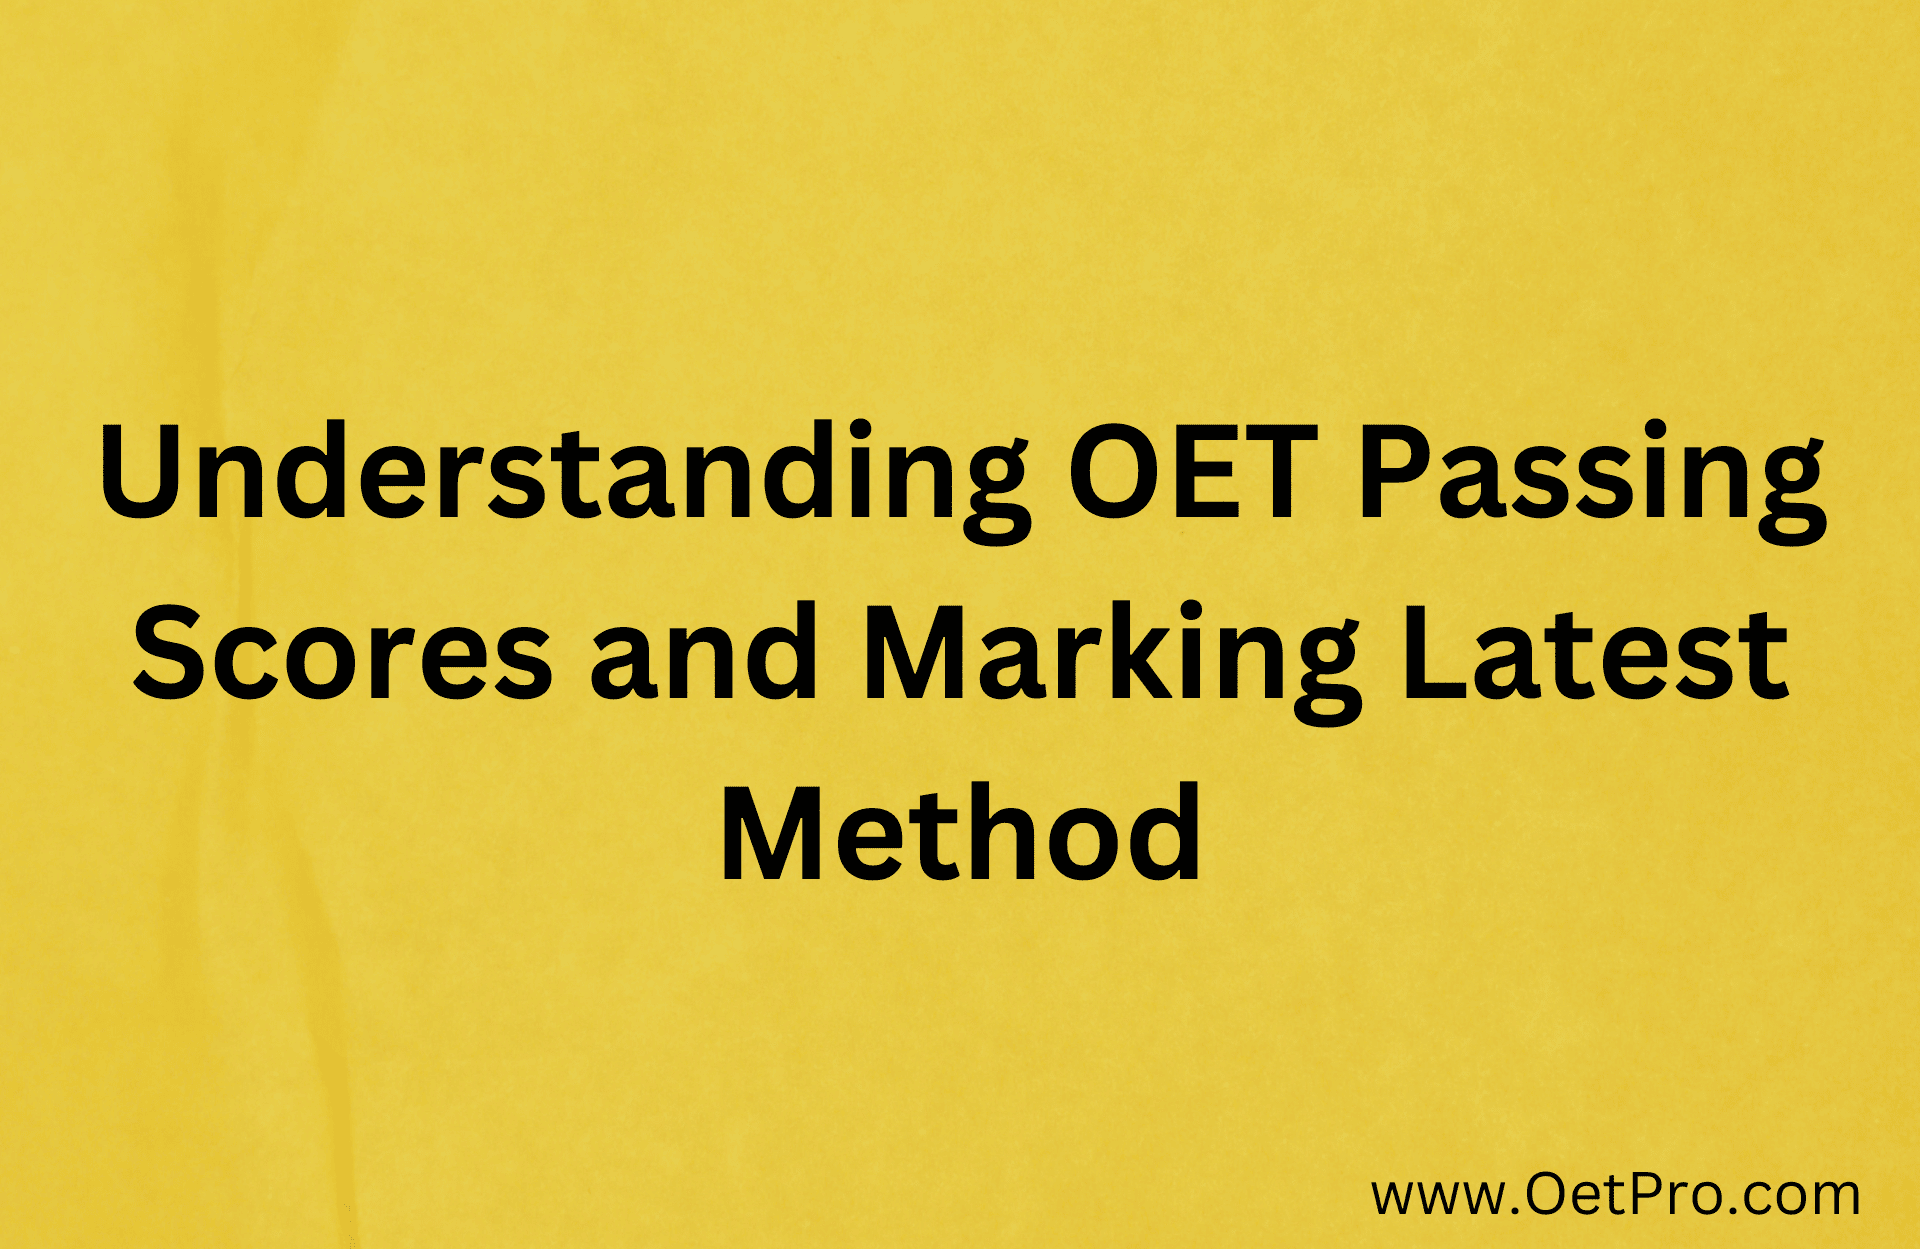 Understanding OET Passing Scores and Marking Latest Method